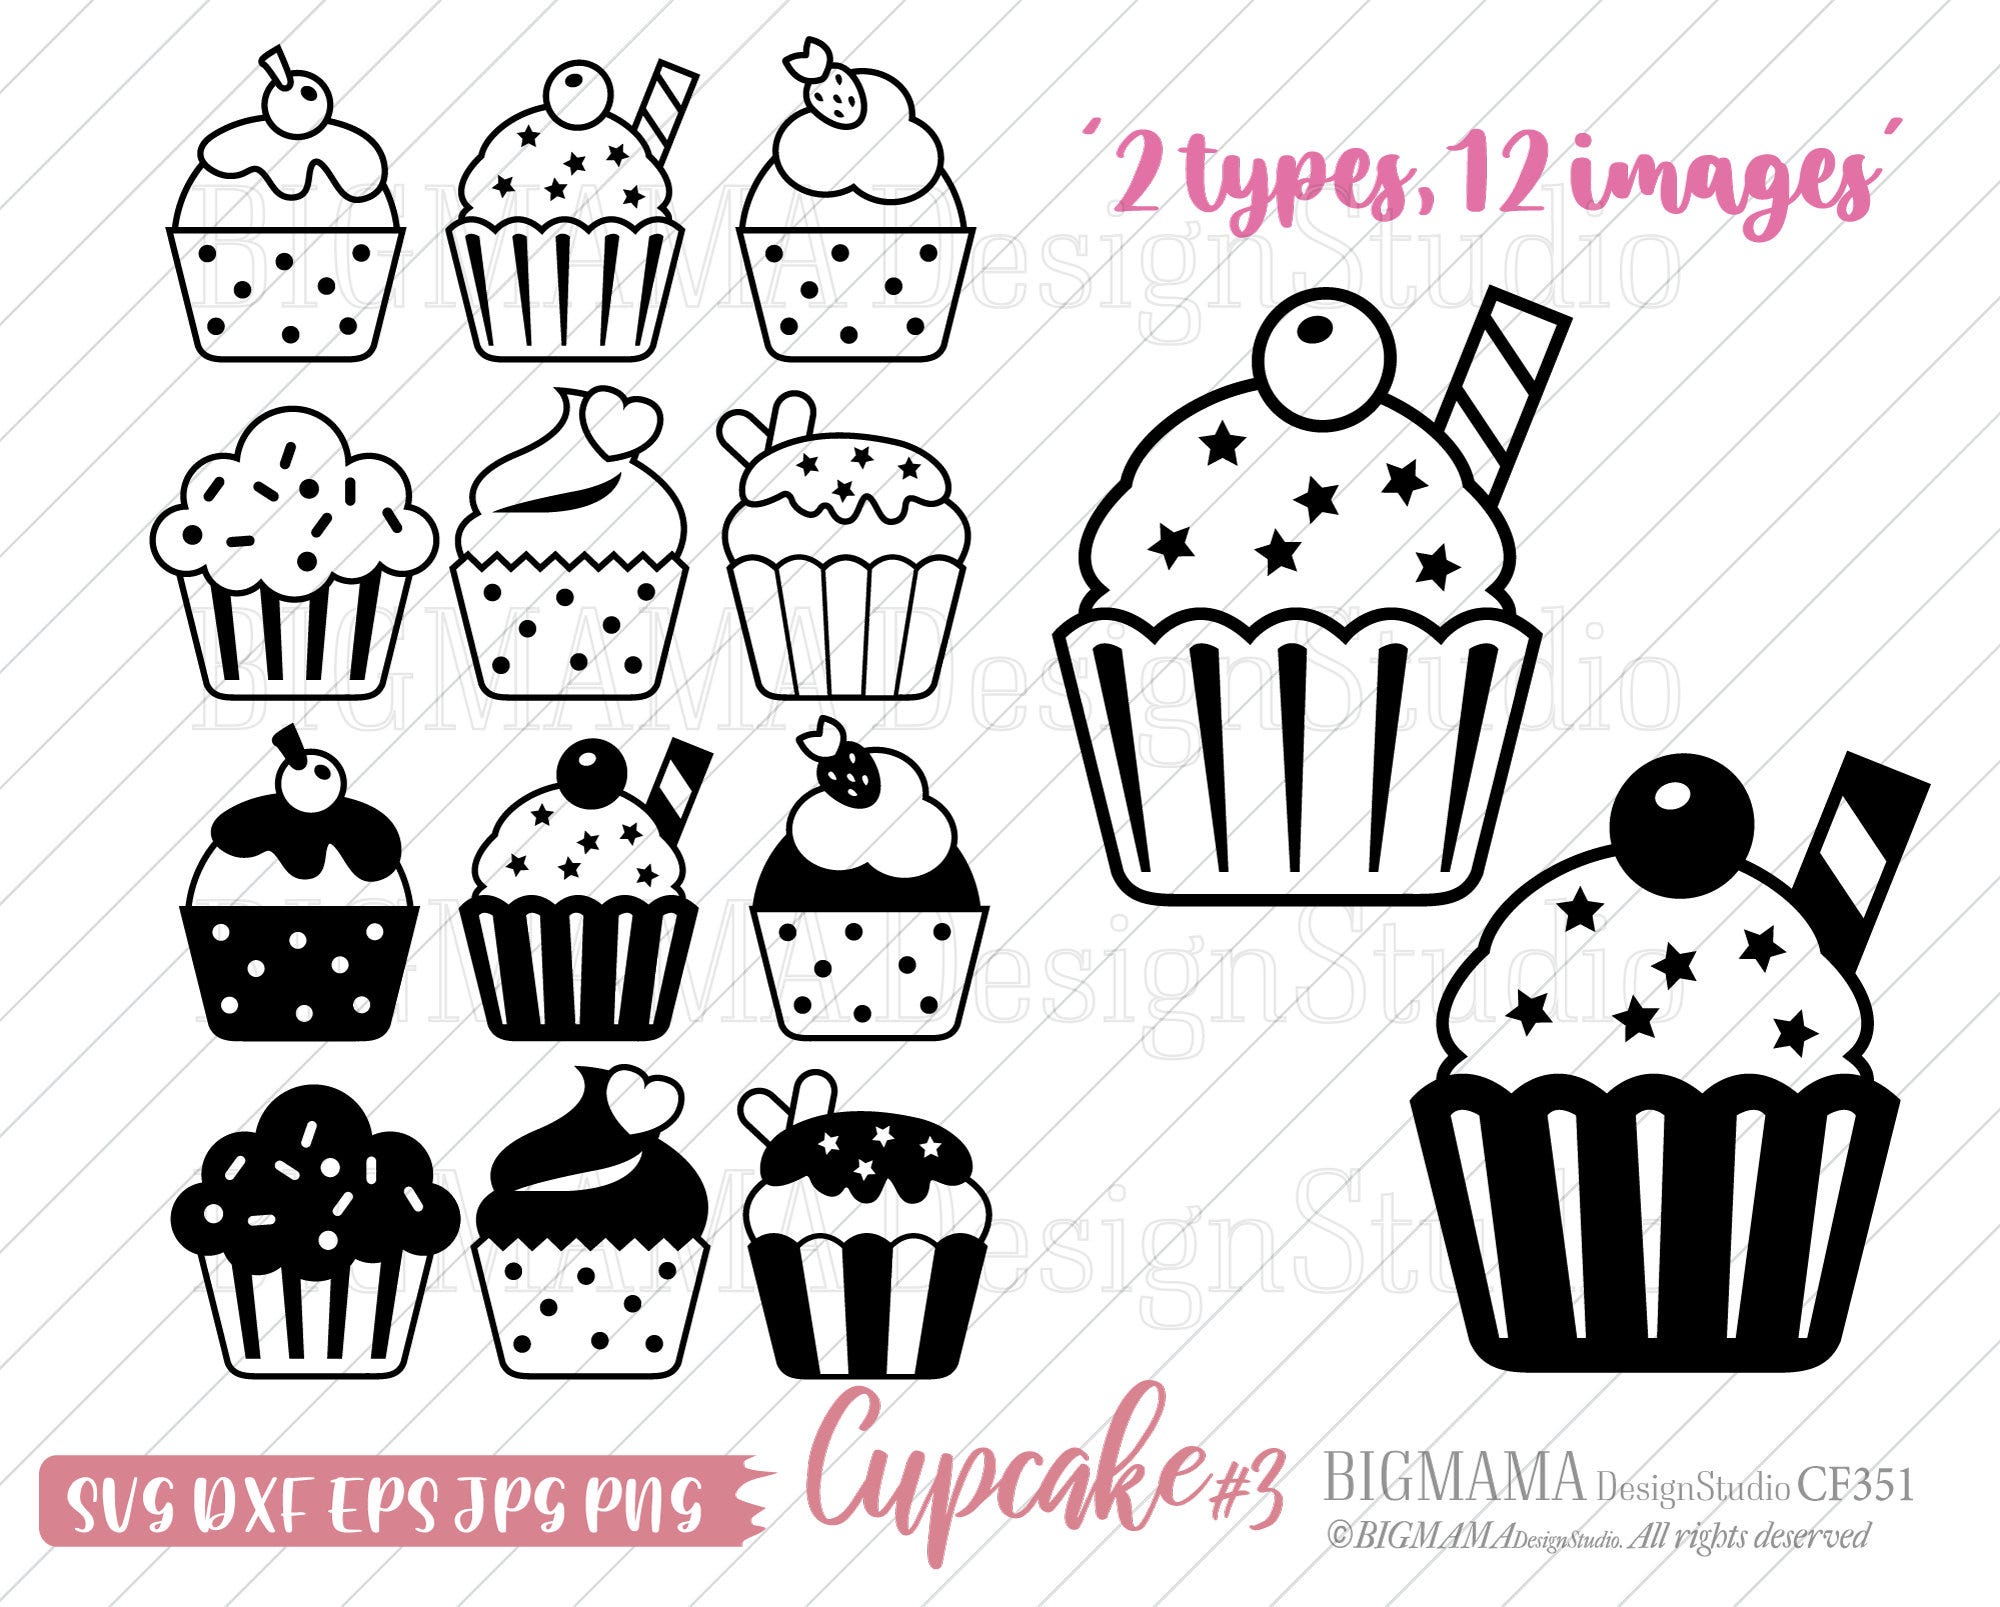 Cupcake SVG,Muffin,Outline,DXF,Muffin Cut File,PNG,Bakery,Birthday,Dessert,Sweets,Cricut,Silhouette,Food,Cute,Instant download_CF351